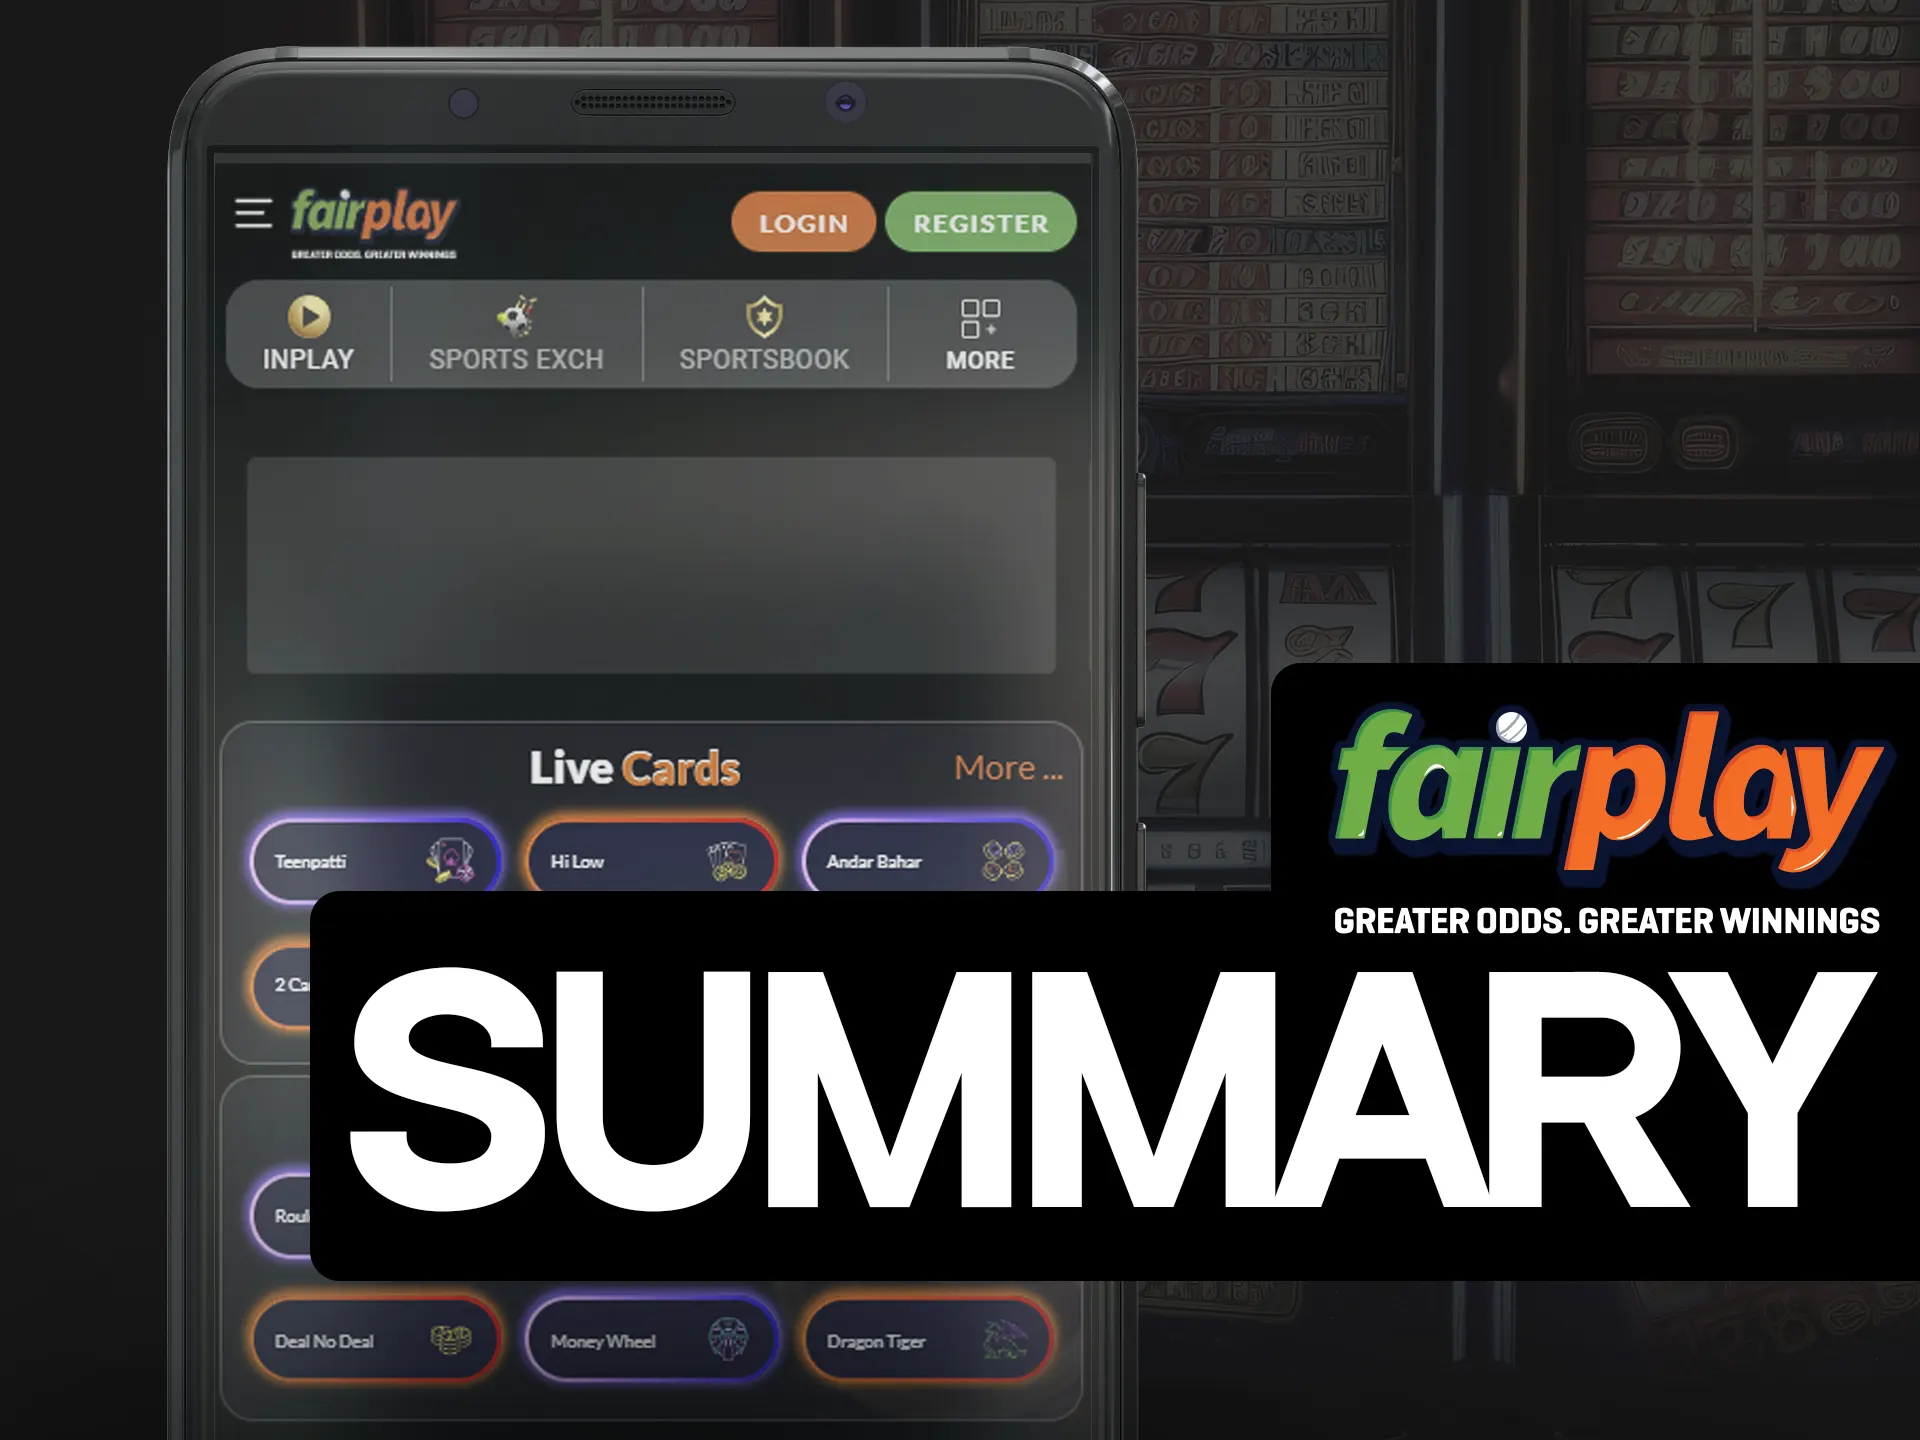 Fairplay offers slots, live games, sports betting, bonuses, and dedicated support.